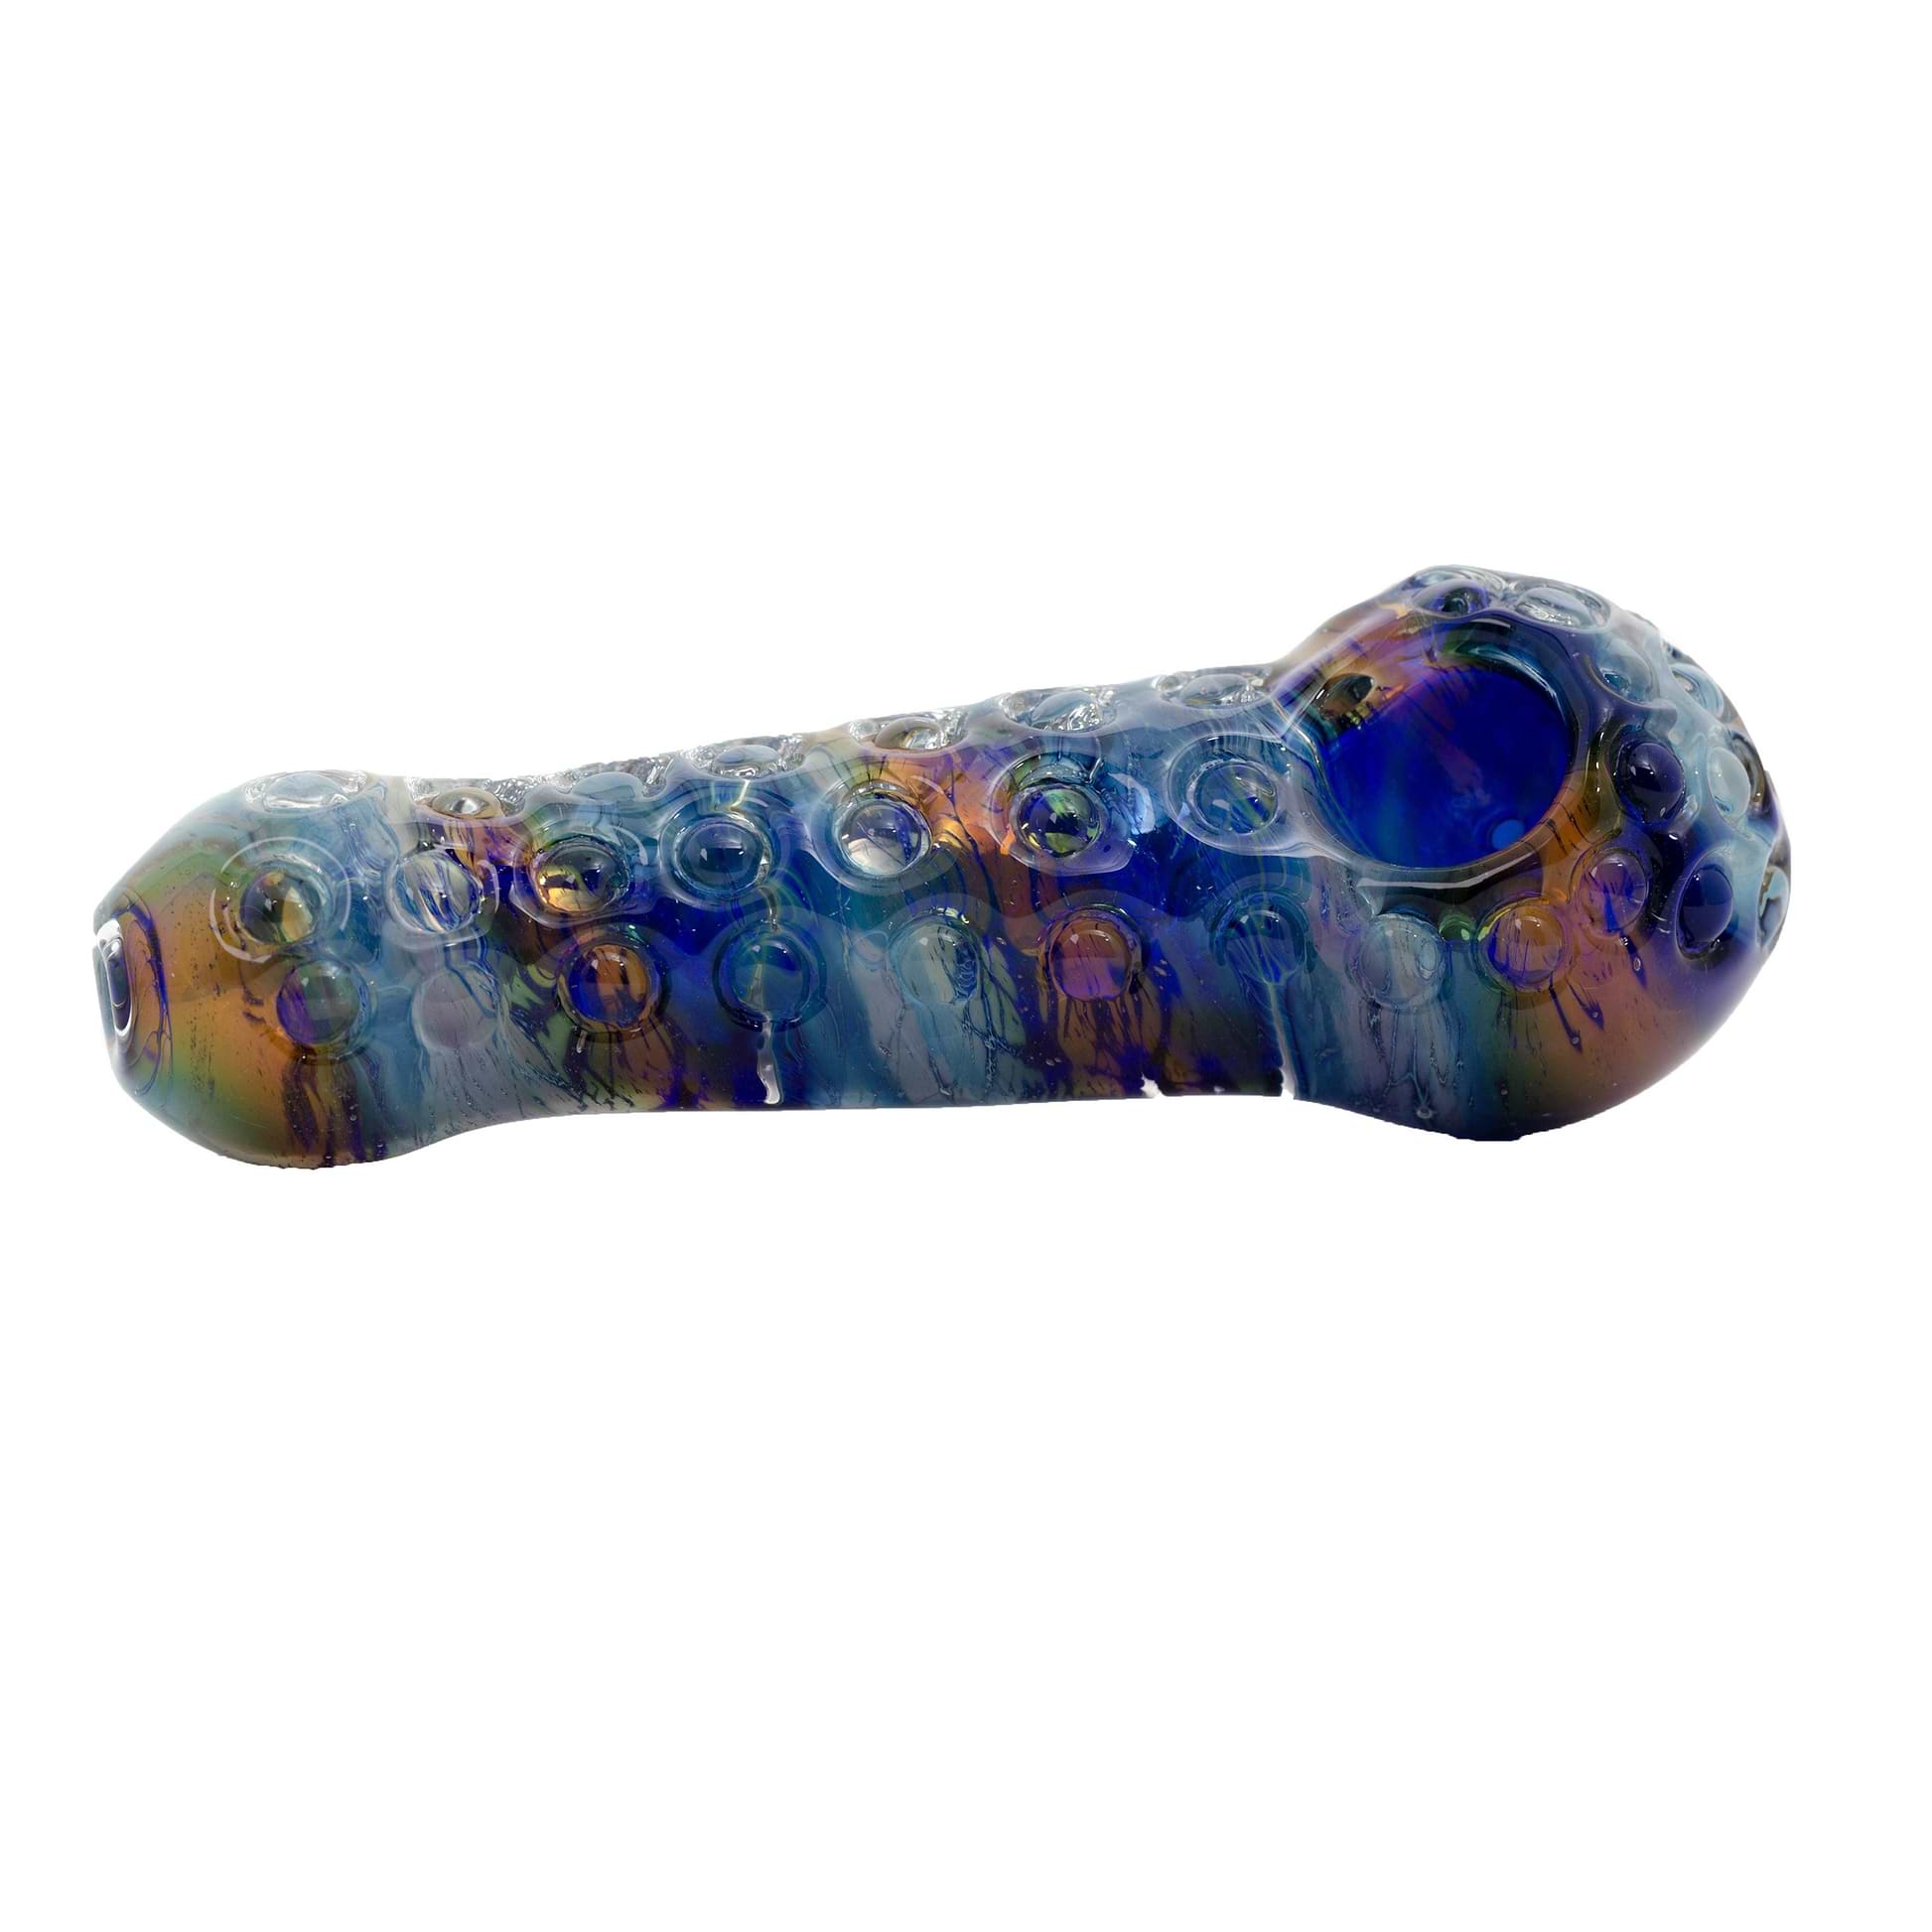 5-inch glass pipe smoking device with textured body for better grip mermaid-inspired ocean look